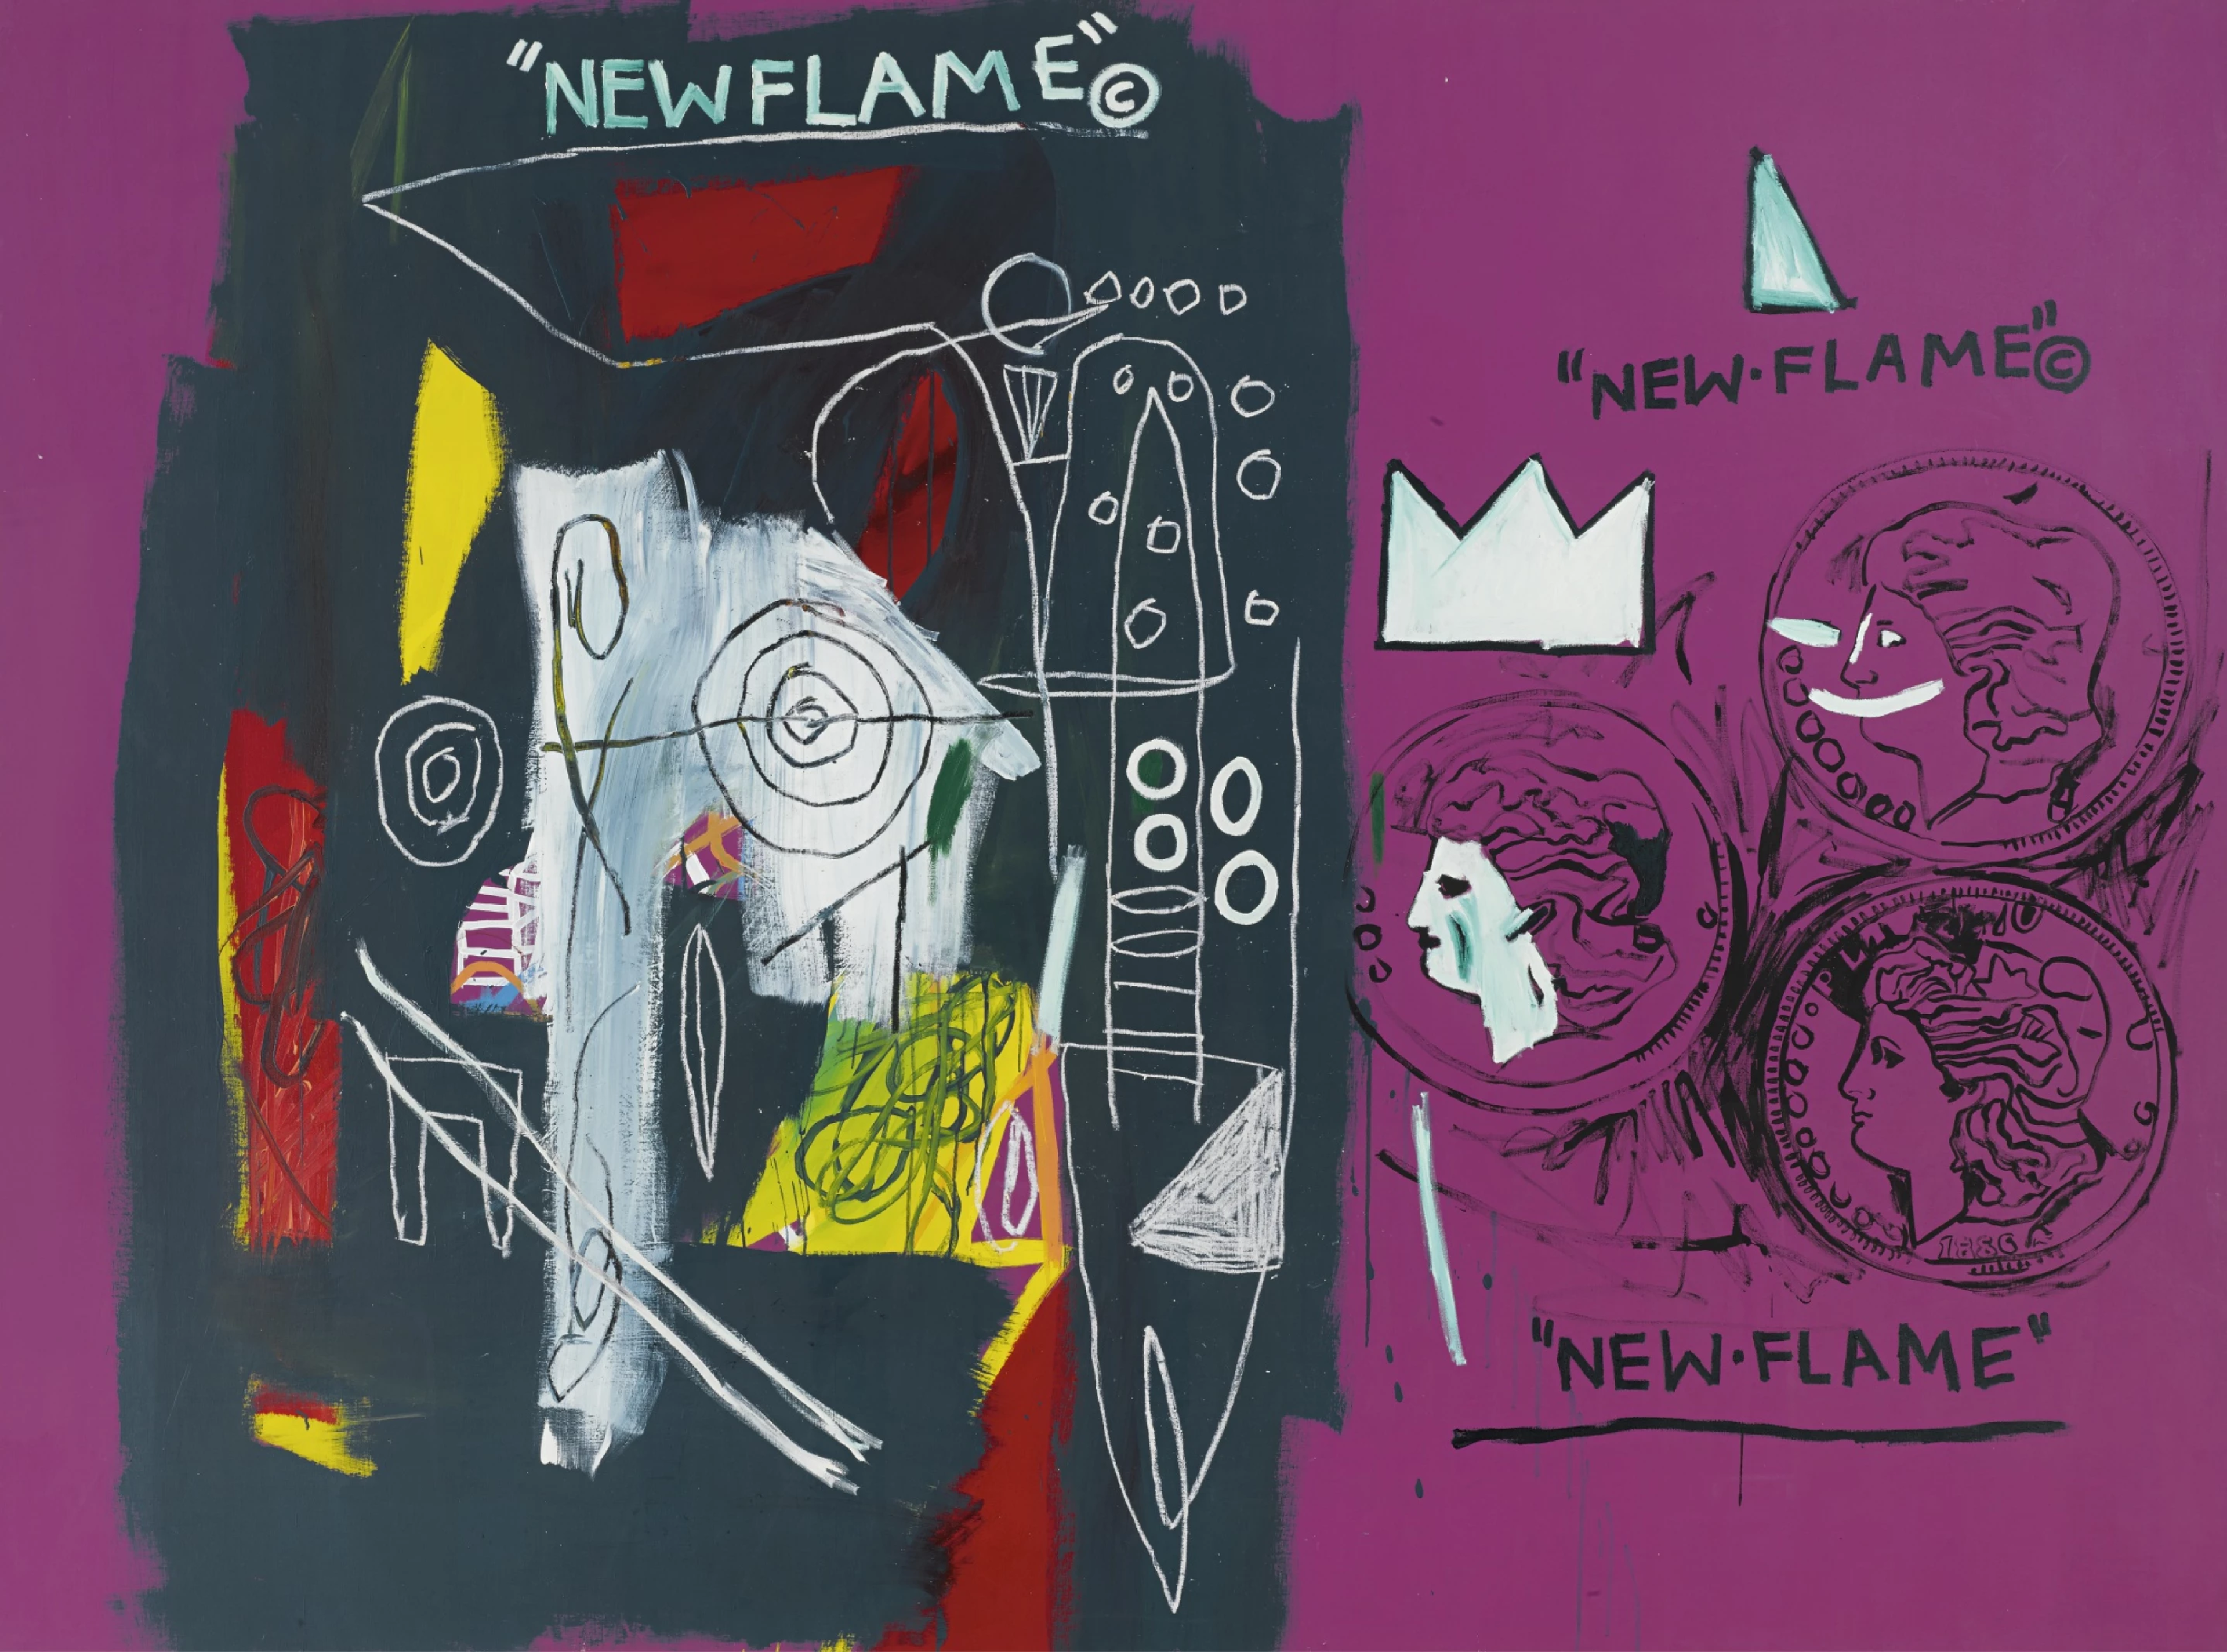 In this work, Warhol outlined three silver dollar coins, which depict the figure of liberty. Subsequently these were coloured in and defaced by Basquiat. Underlining Warhol’s reference to the torch bearing statue of liberty, which was built in 1886 and is the same year as Warhol's silver dollar coins, Basquiat titled that section of the canvas 'NEW FLAME'. Through the inclusion of his signature crown in the centre right, Basquiat accredited his SAMO persona to this half of the composition. Almost half of the original pink background is covered with frantic swathes of charcoal black, painted blocks of red and yellow and childlike white scrawls.